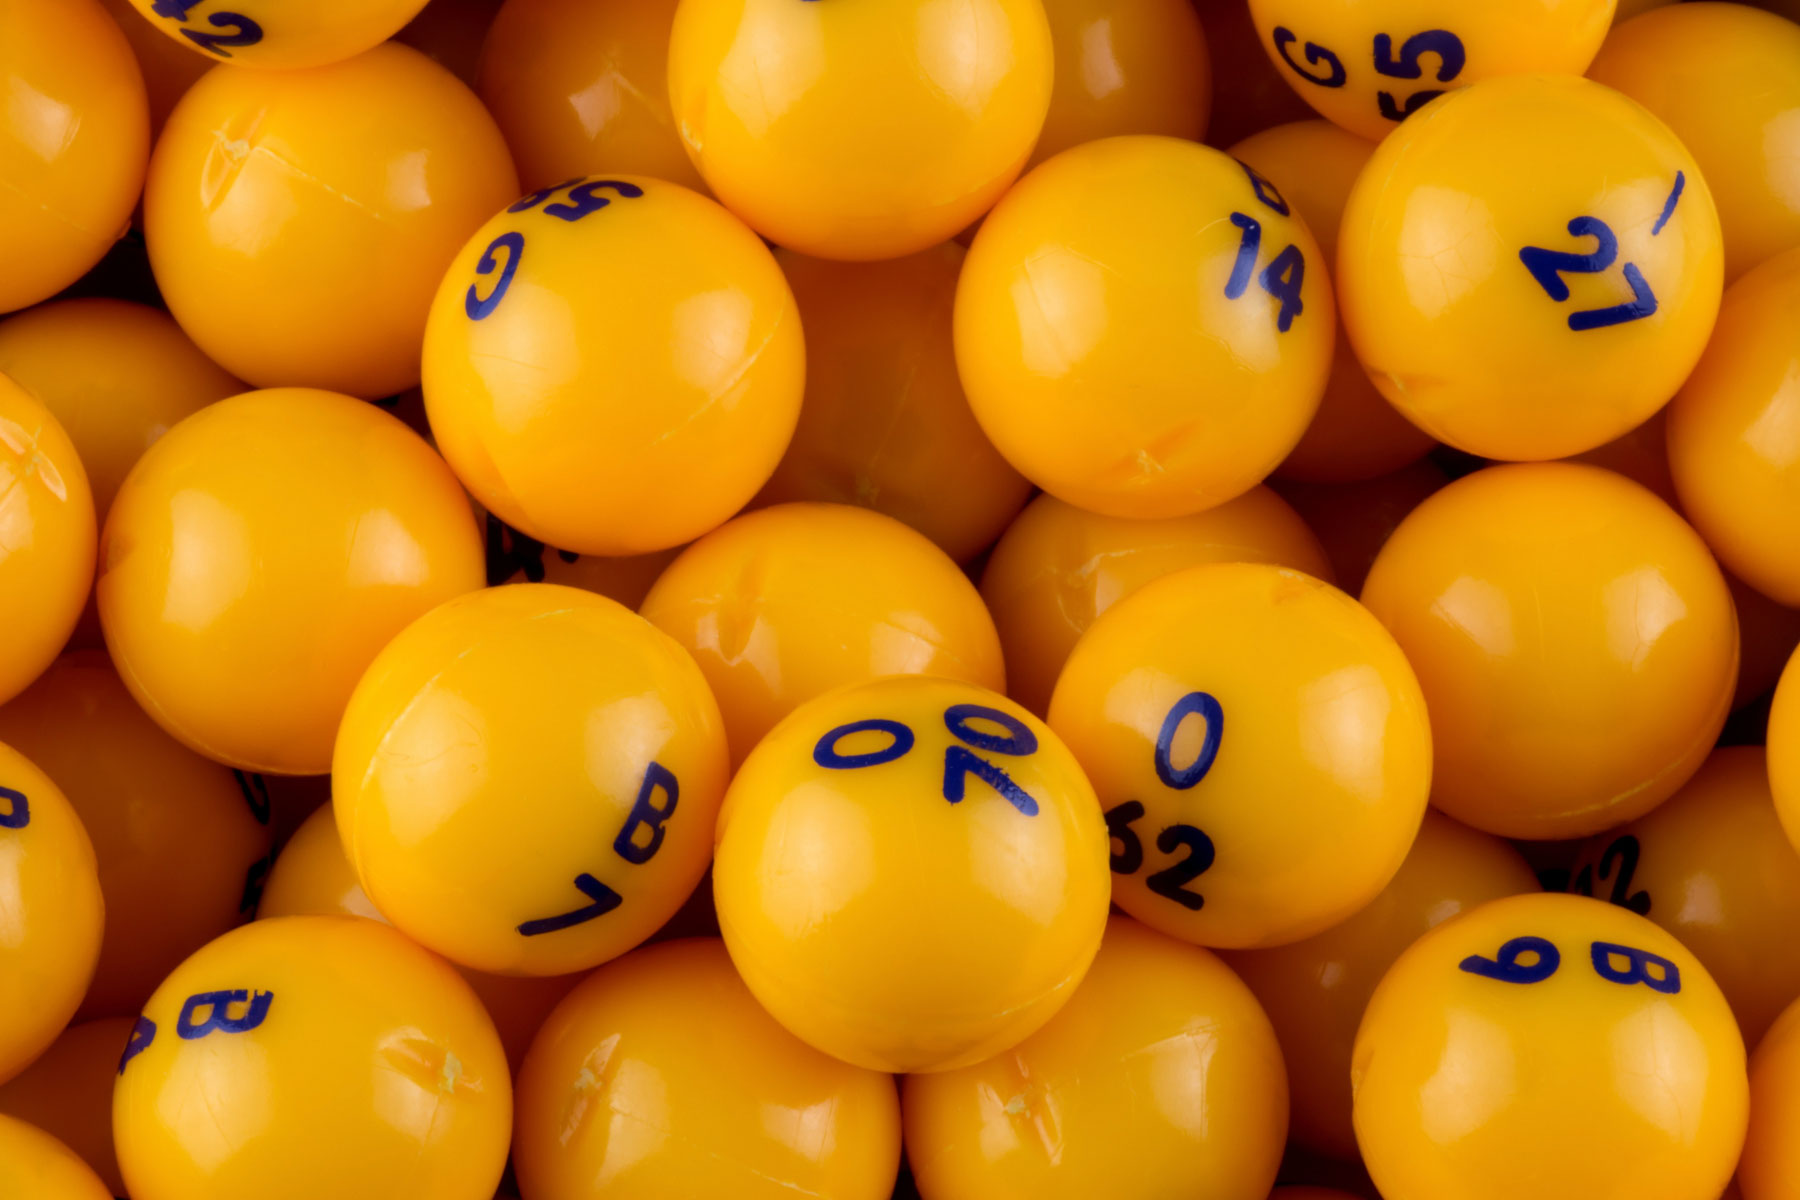 Yellow bingo balls from up close, in some of the balls, you can see a combination of a letter and a number. 